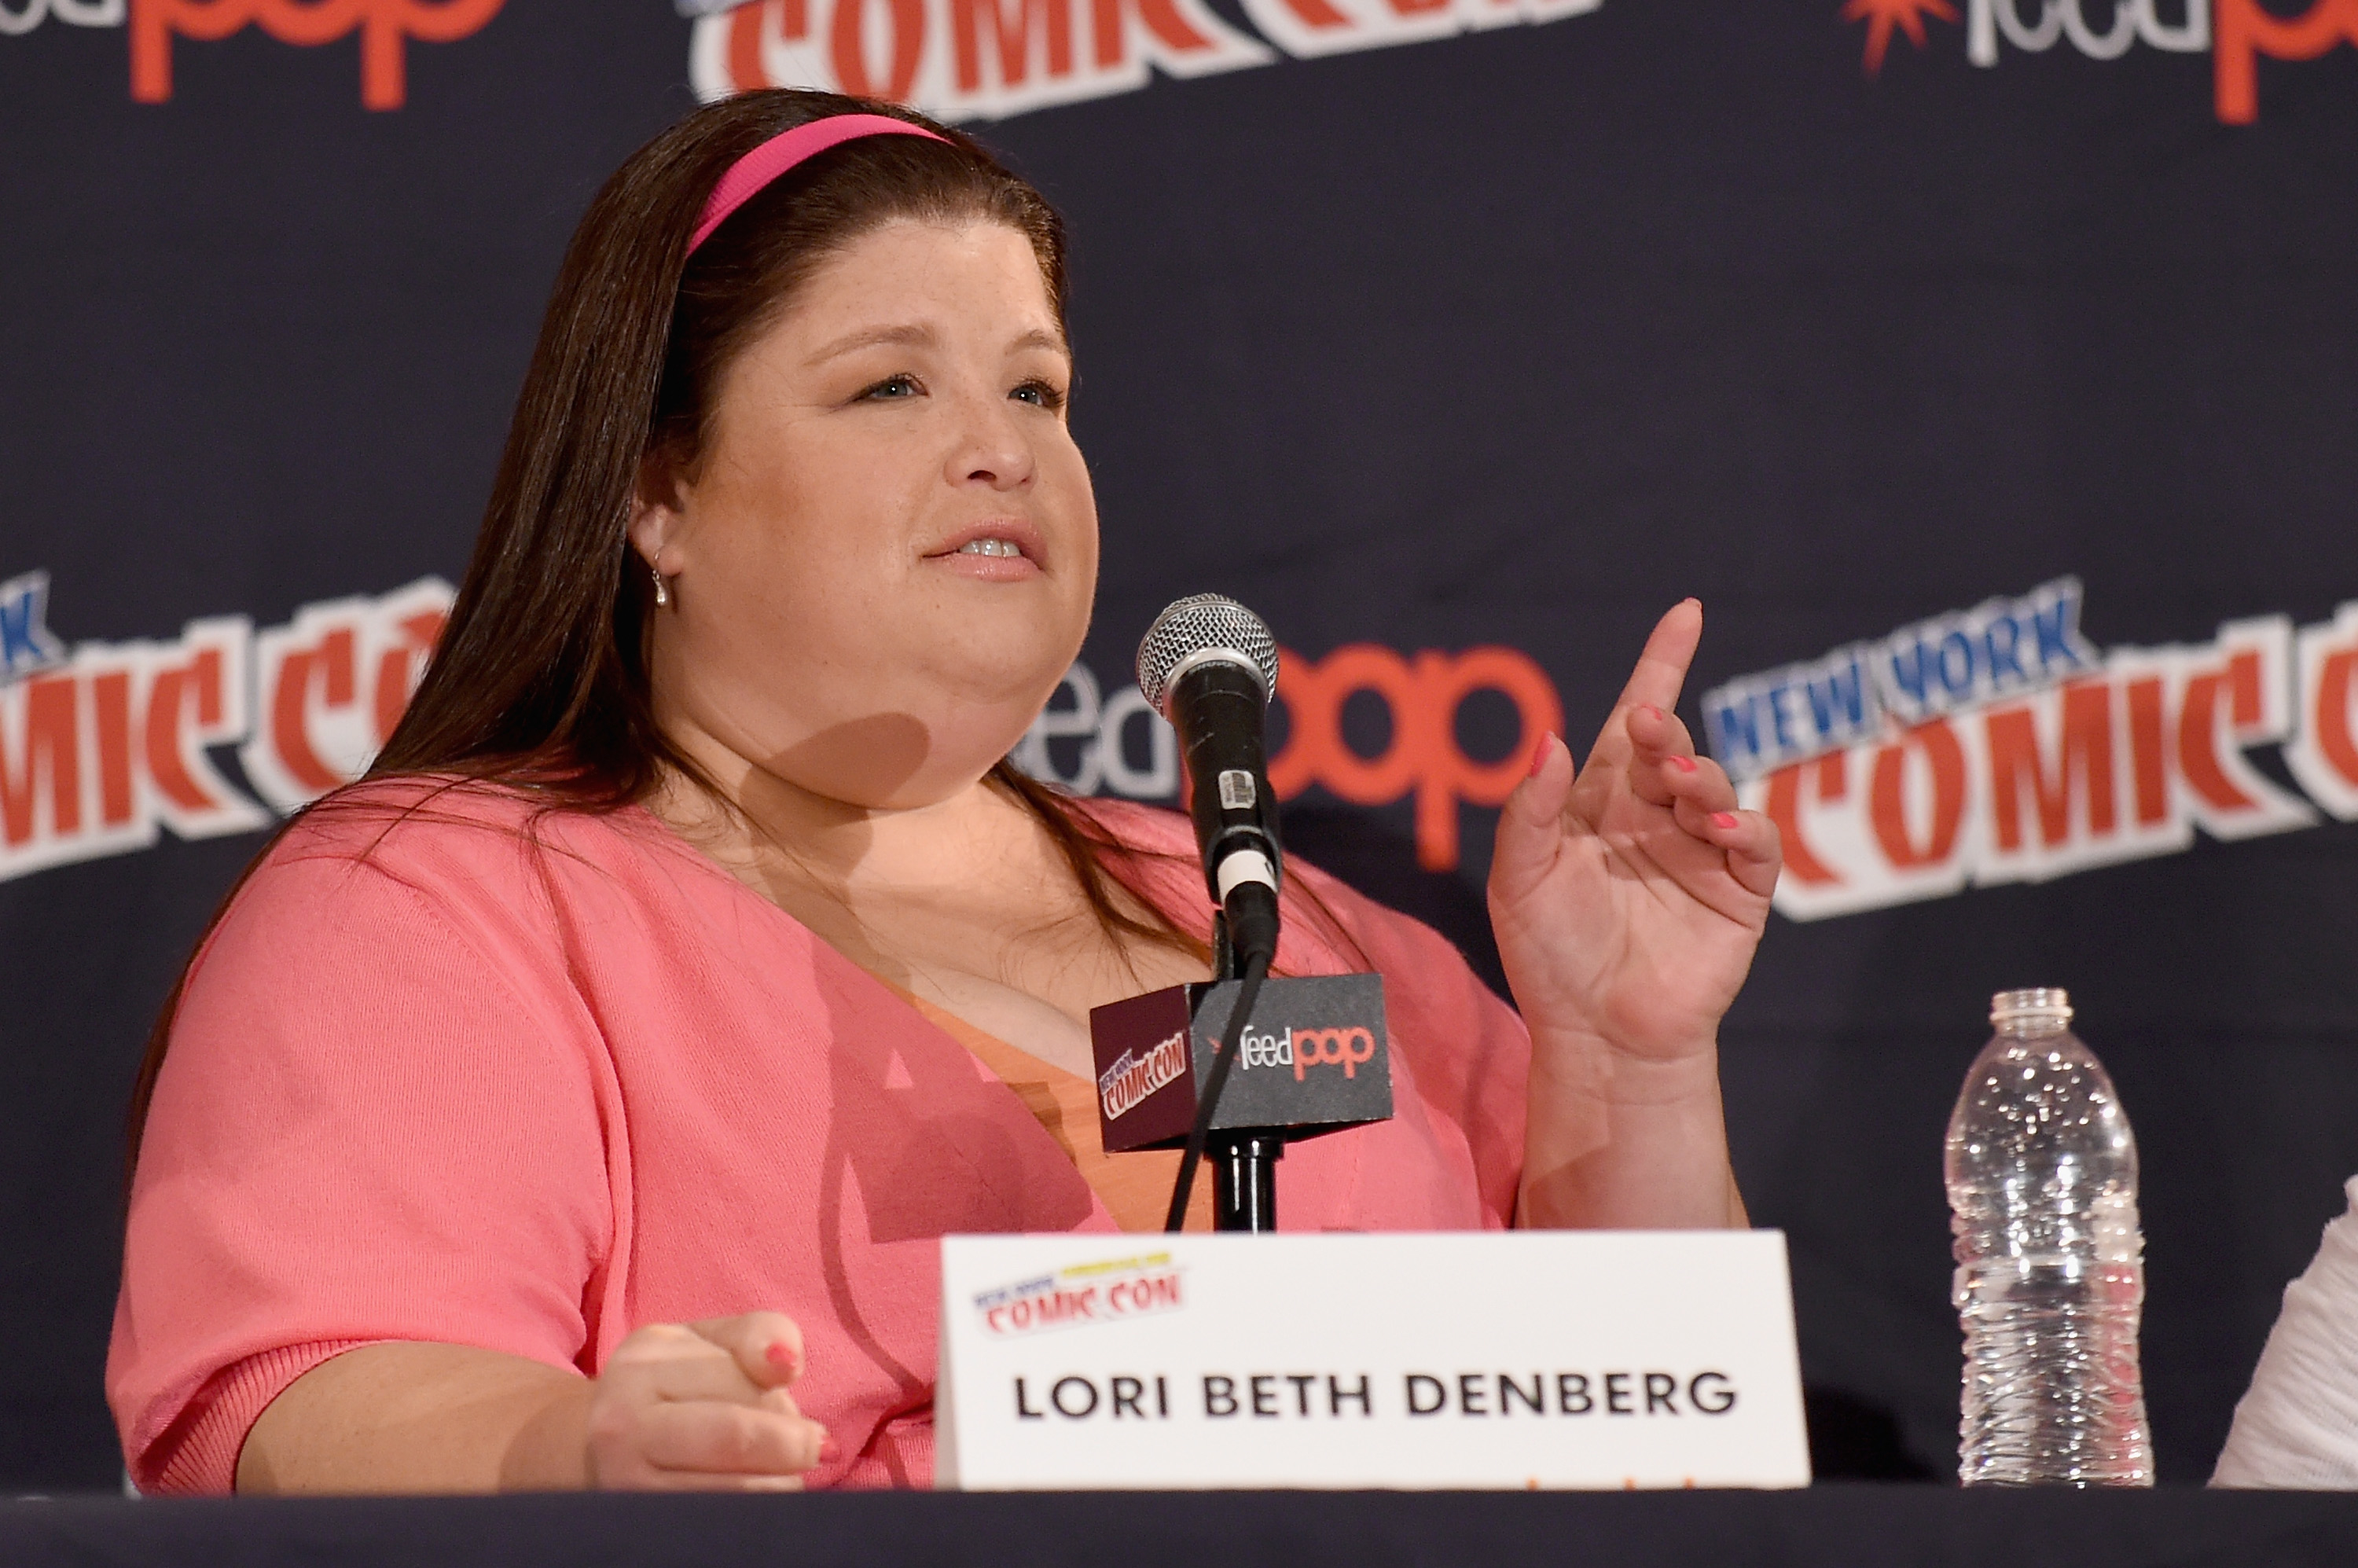 Lori Beth Denberg speaking at a panel with a microphone and a nameplate in front of her